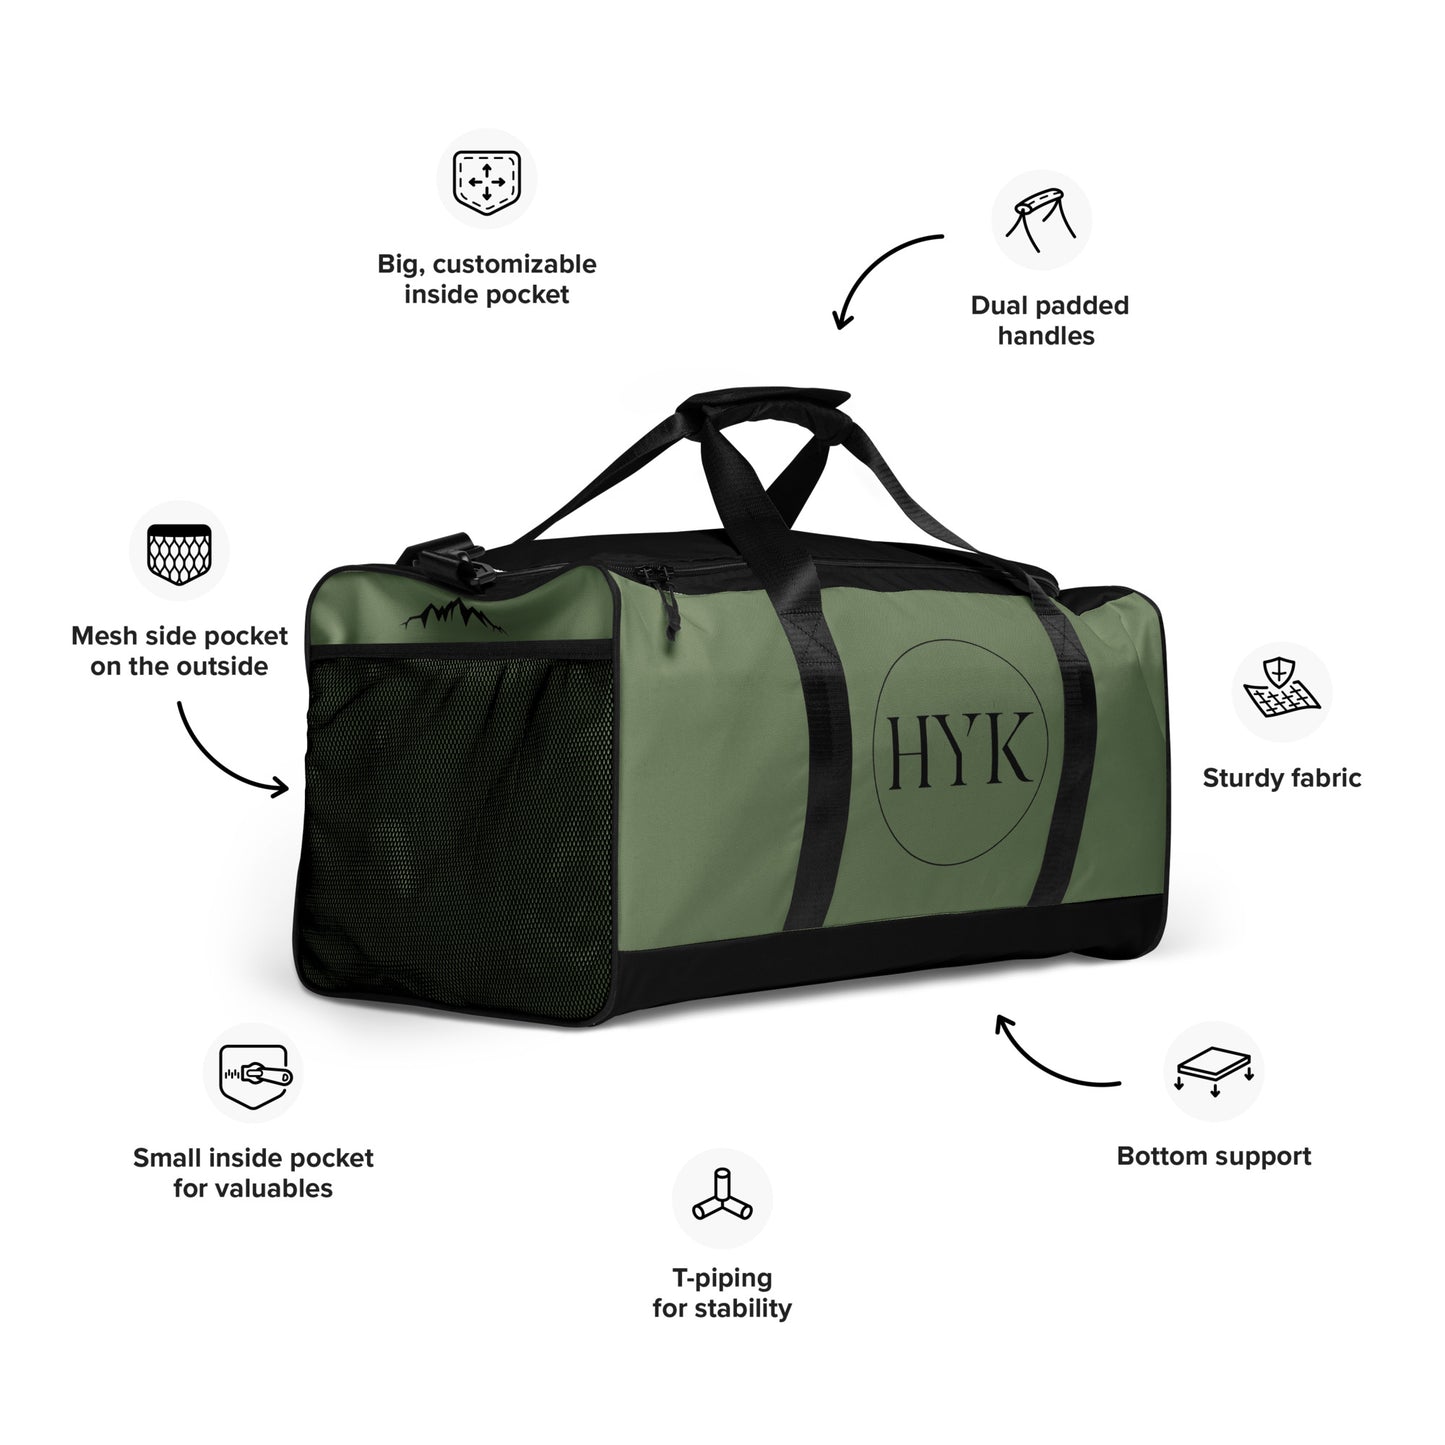 duffel gym bag for hiking or outdoor adventure